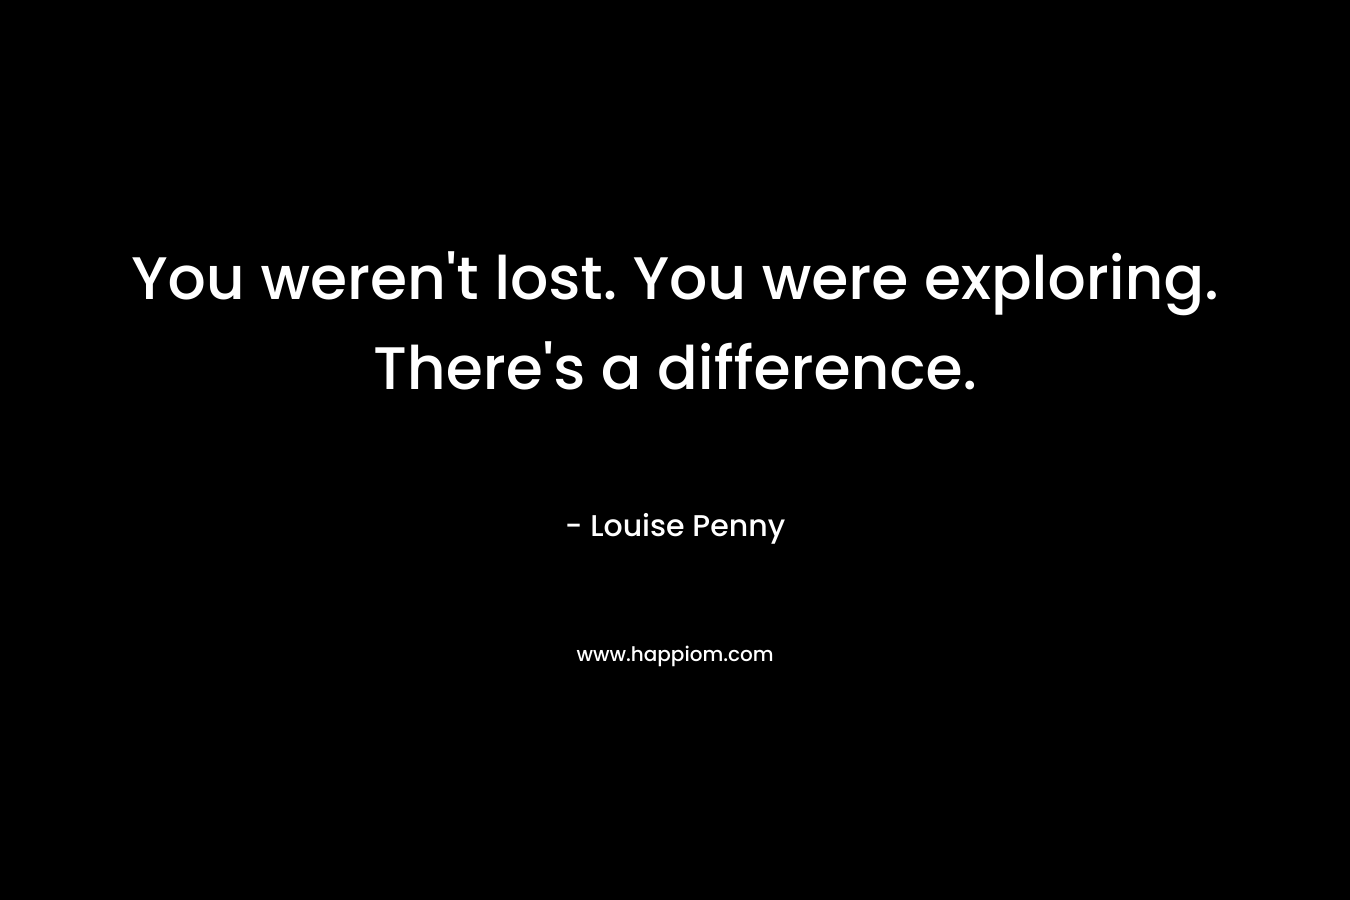 You weren’t lost. You were exploring. There’s a difference. – Louise Penny